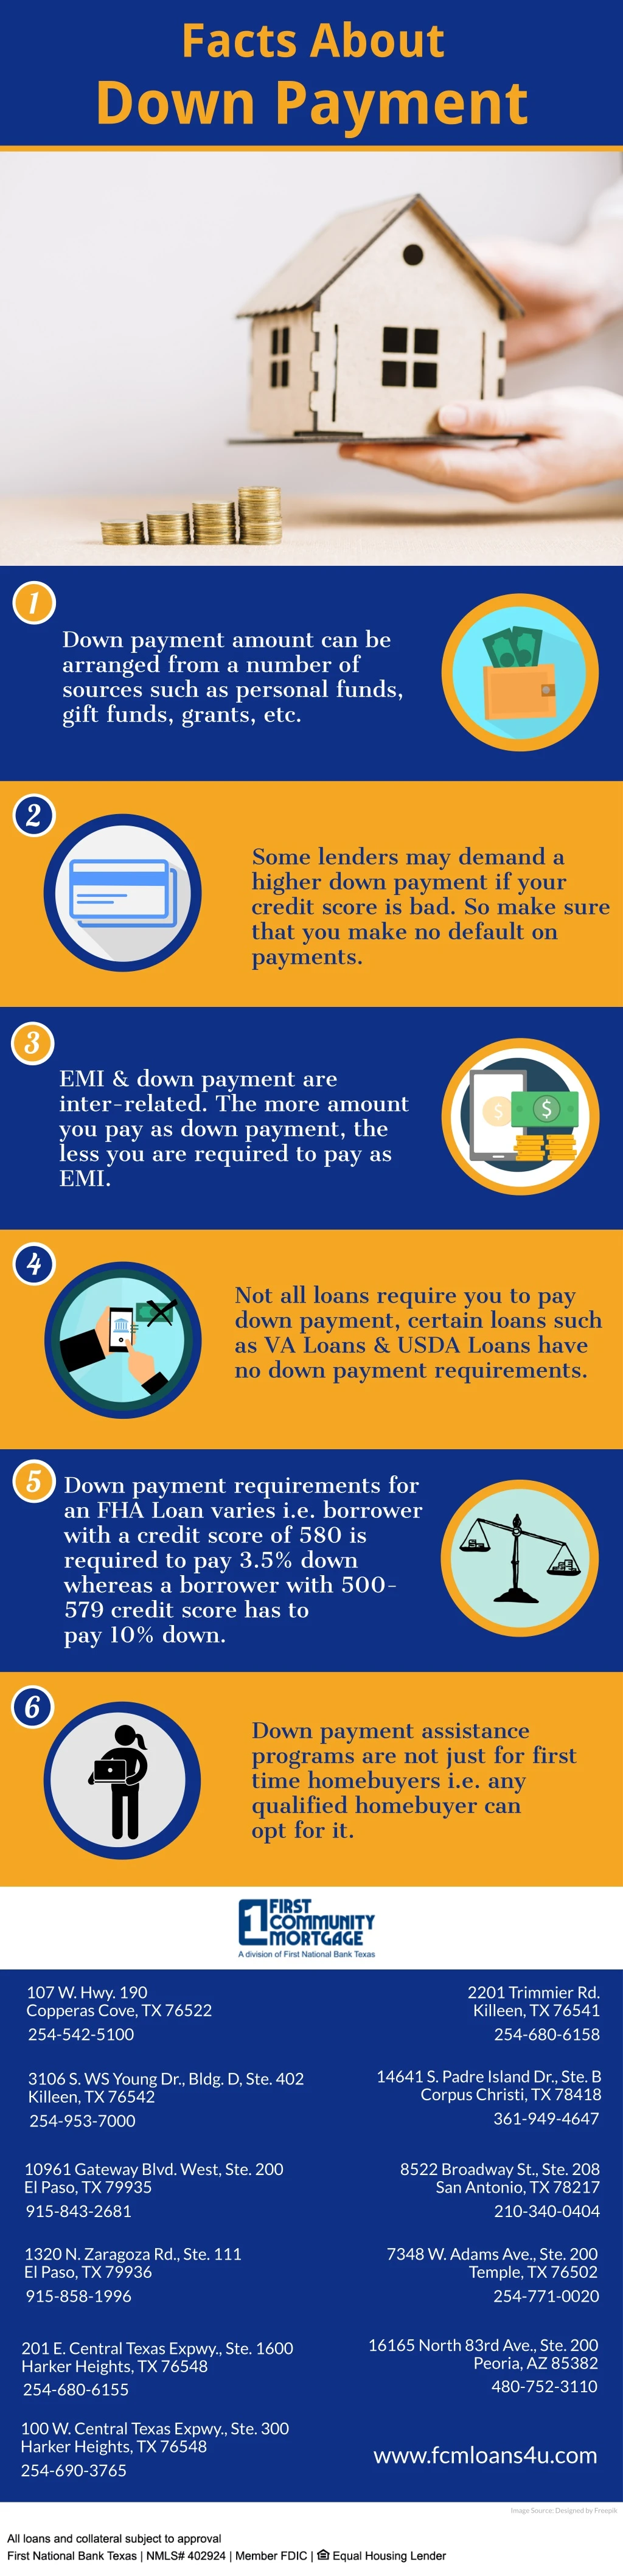 facts about down payment